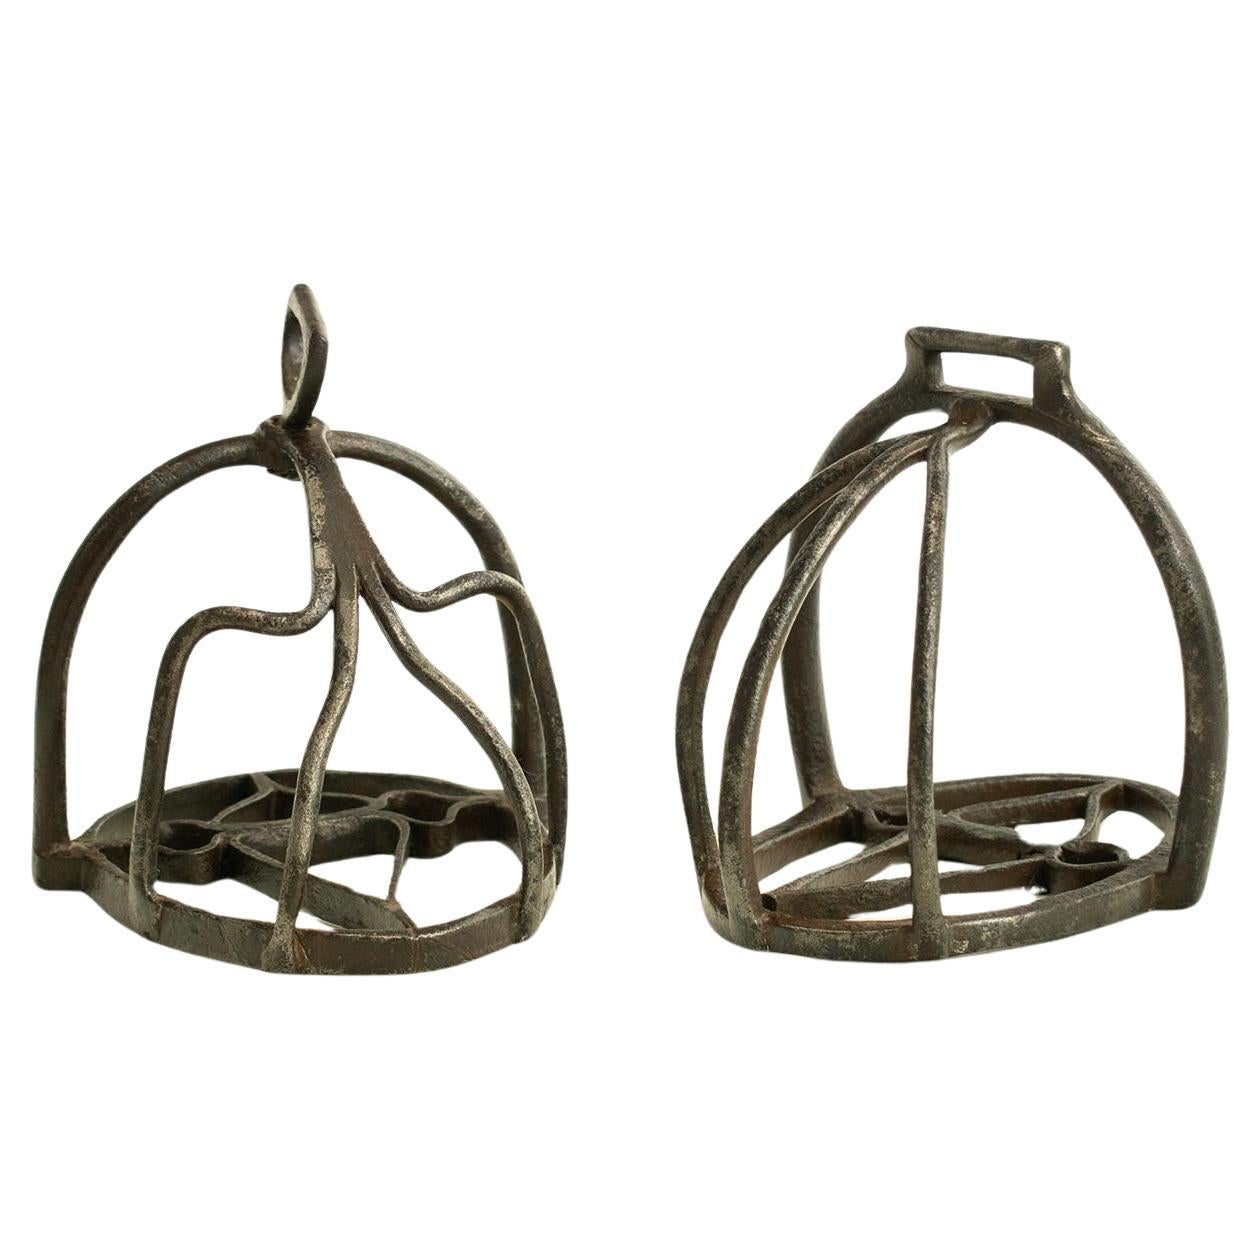 Composed pair of original mid 17th/early 18th century Cavalry basket Stirrups For Sale